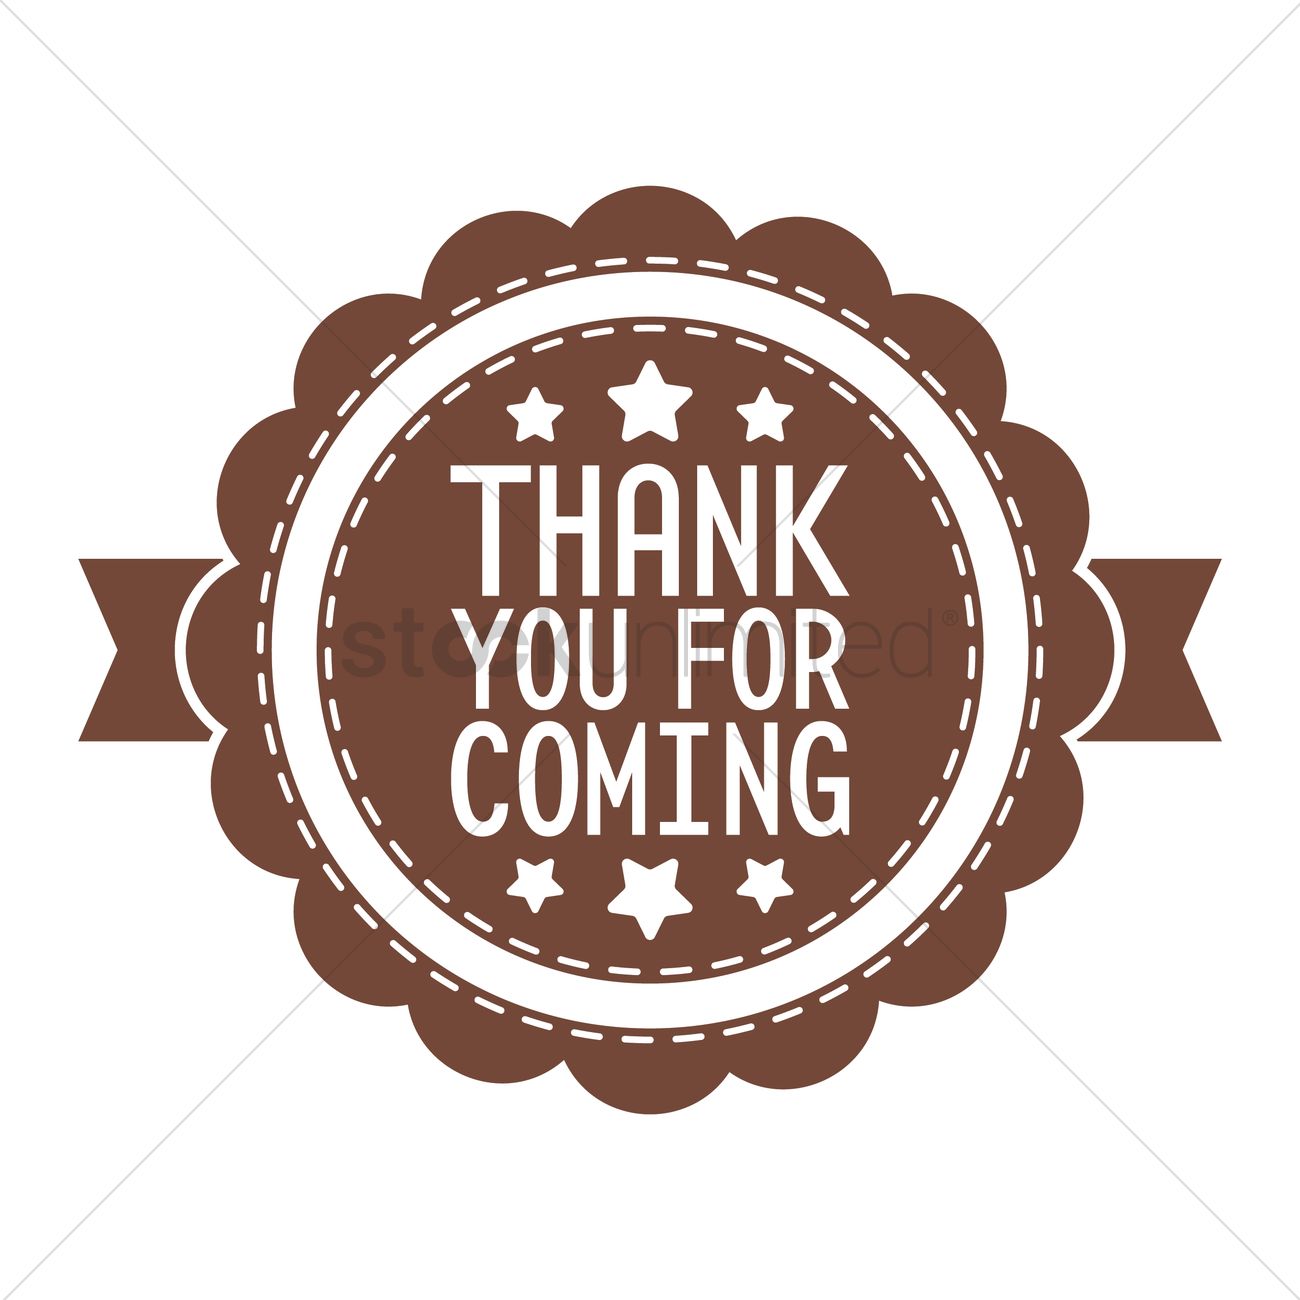 Thank you for coming label Vector Image.